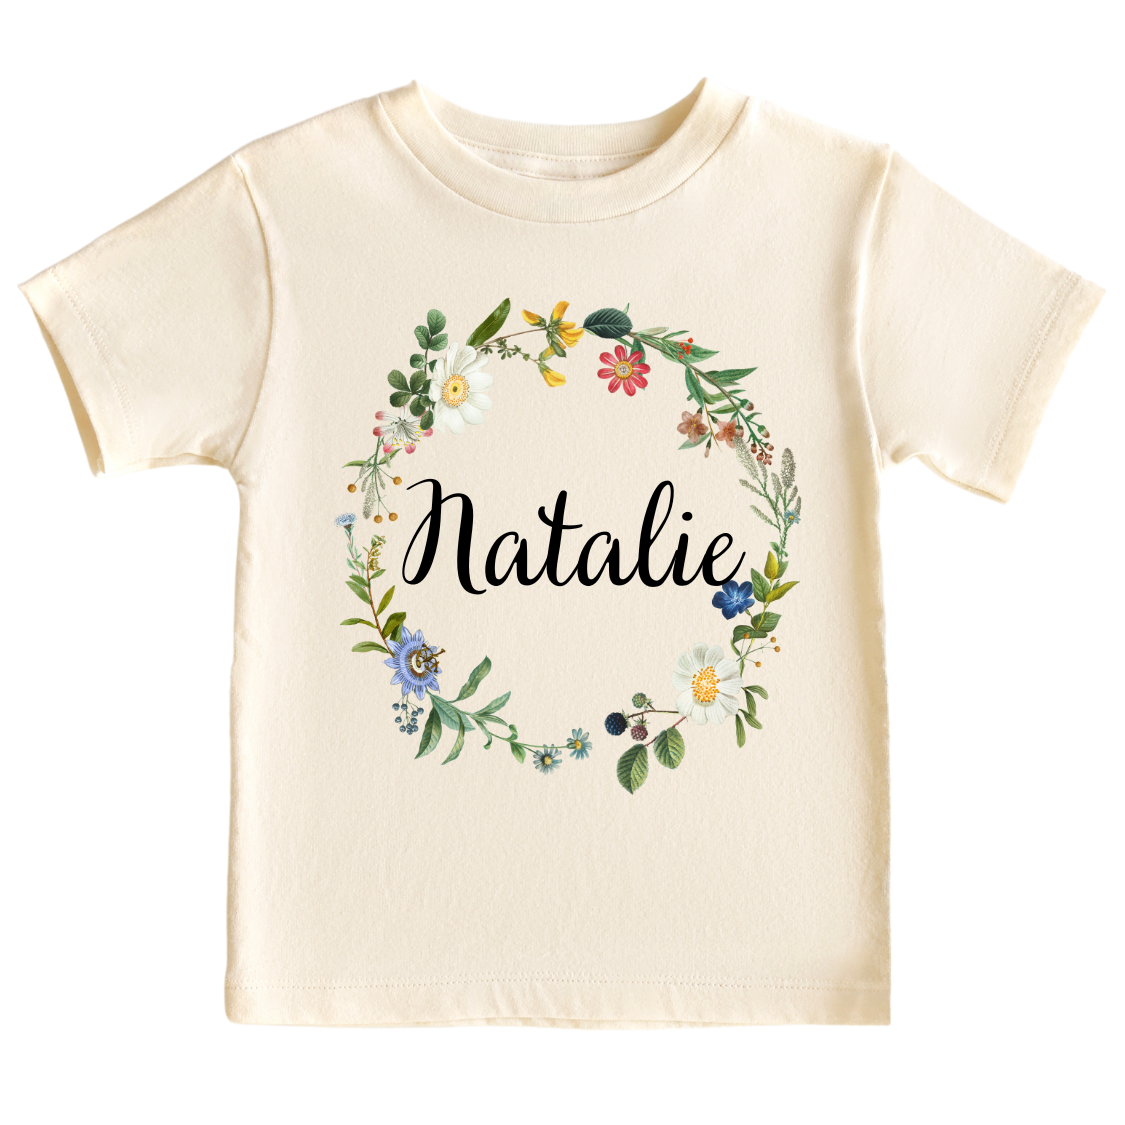 Kid Tshirt with cute floral wreath design and customizable text 'Name'.